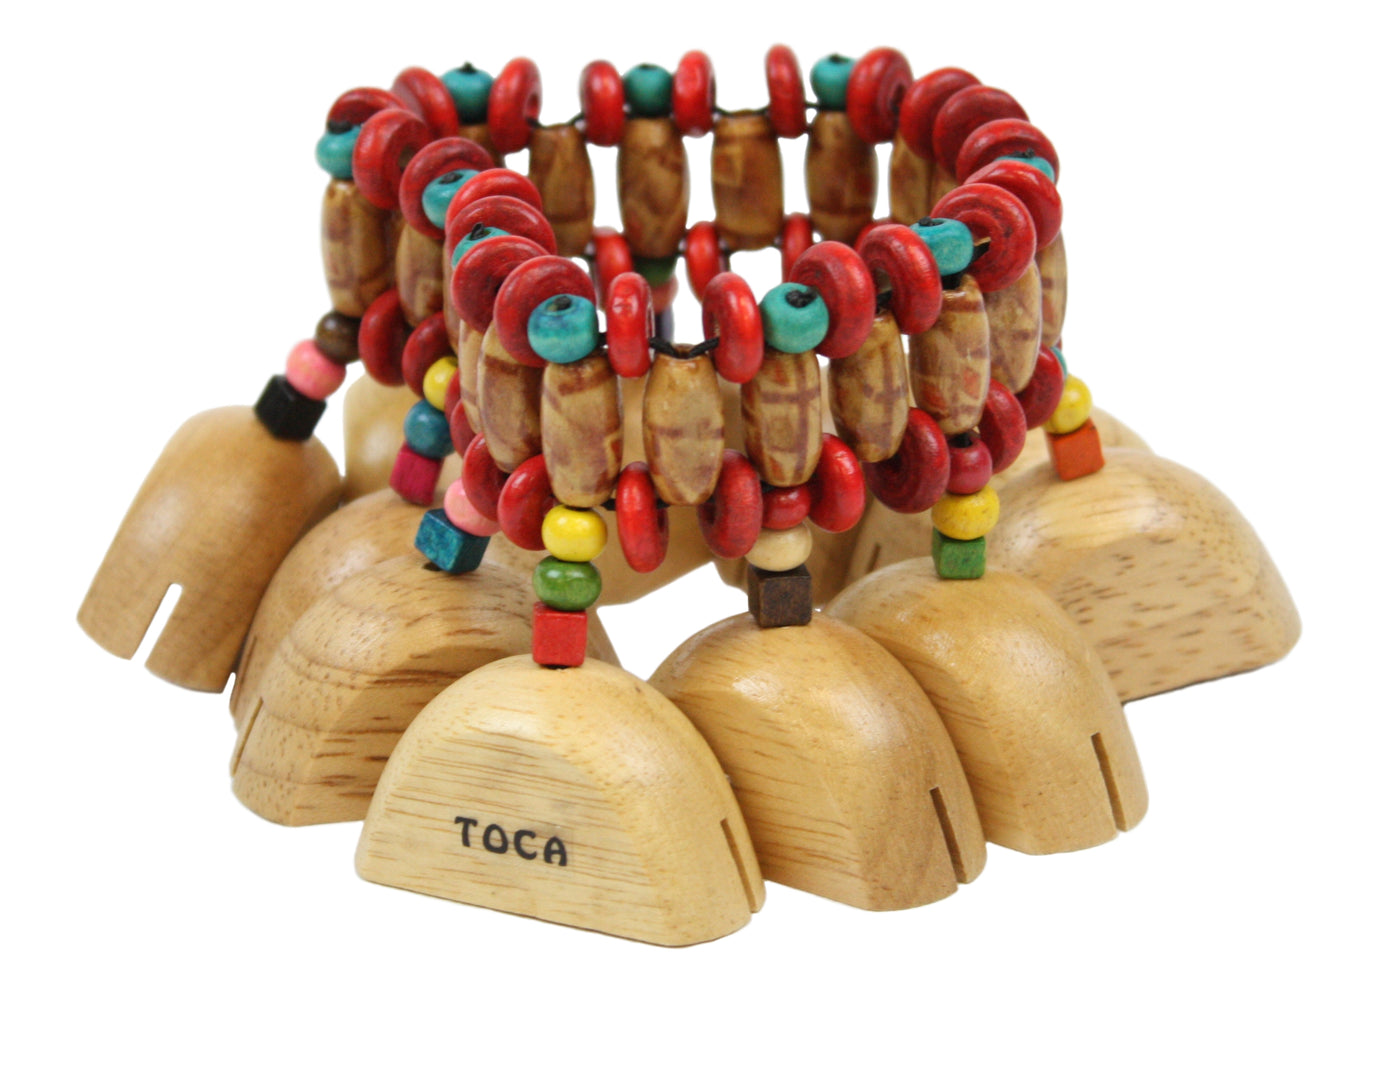 Toca Wooden Rattle for Ankle or Wrist